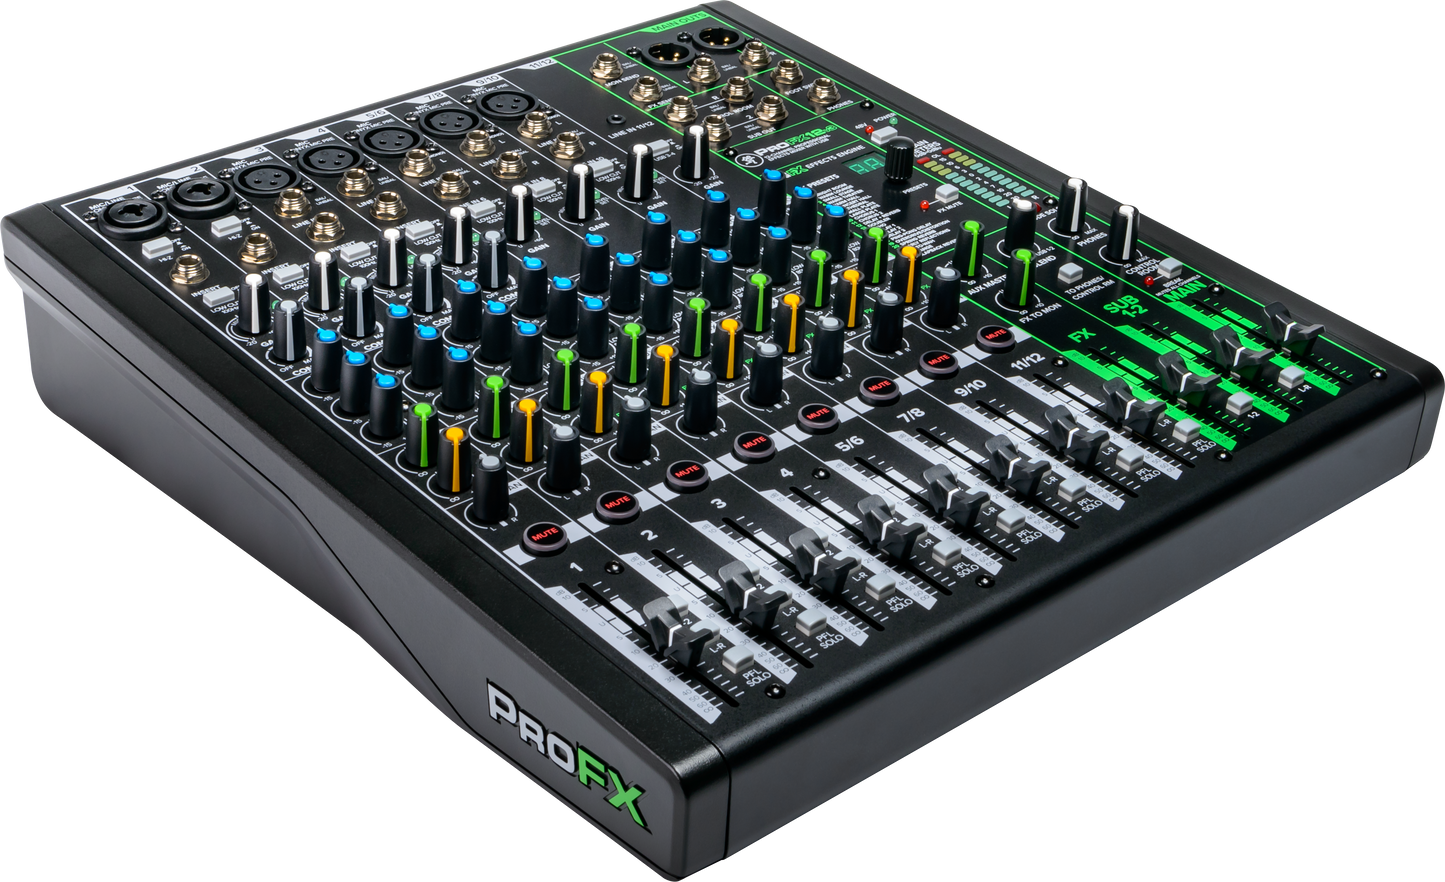 Mackie PROFX12 v3 Compact Mixer with effects